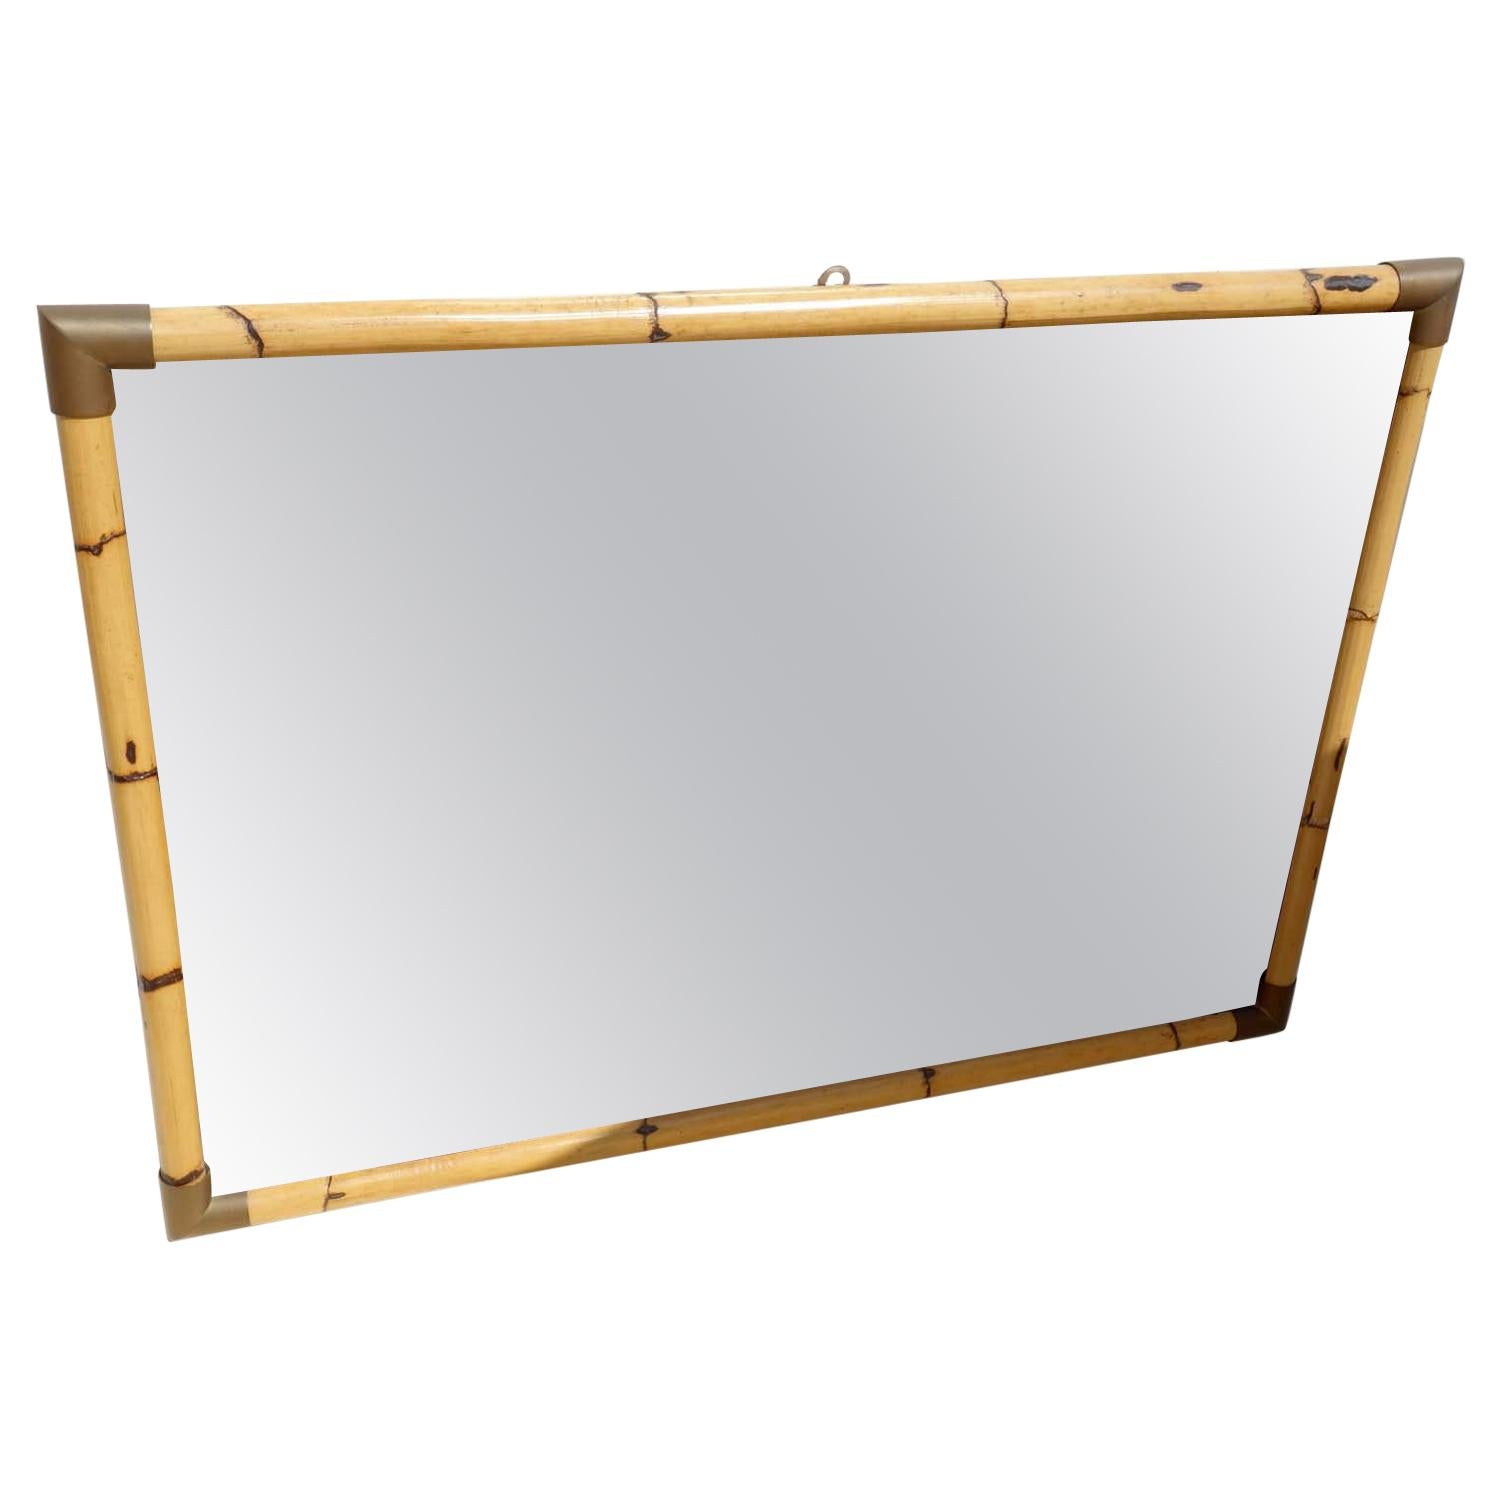 1970s Hollywood Regency Design Bamboo and Brass Wall Mirror For Sale